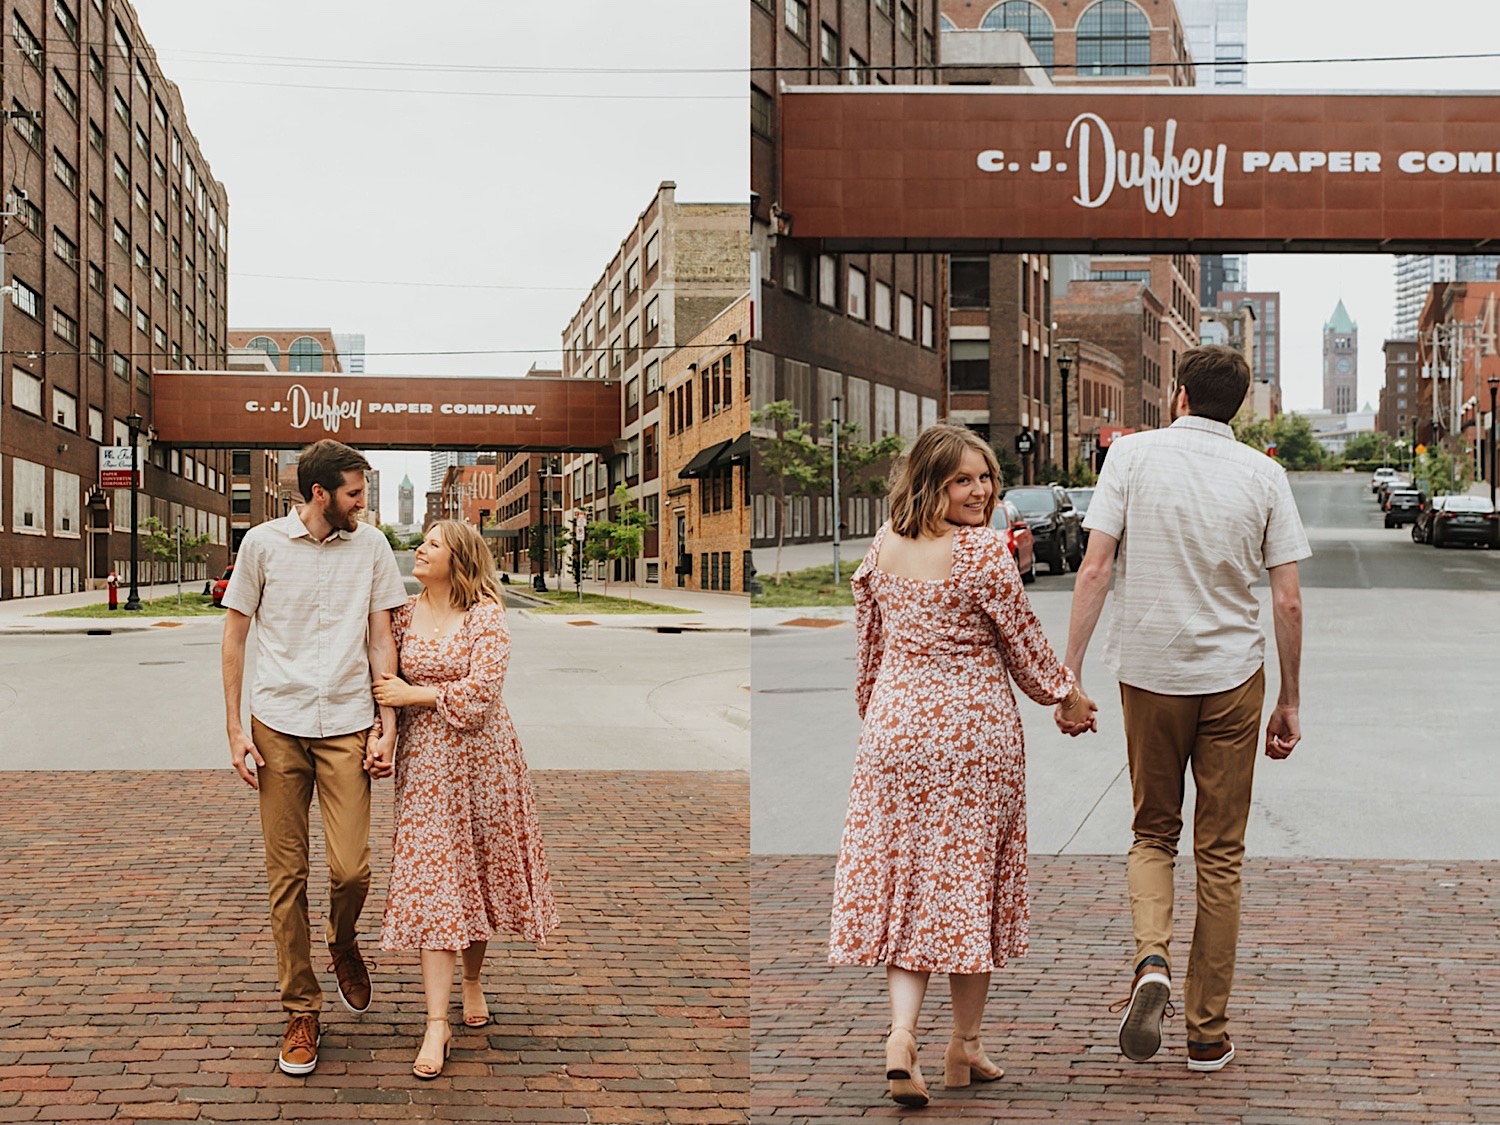 2 photos side by side of a couple in downtown Minneapolis, in the left they hold hands and walk towards the camera, in the right they're holding hands and walking away from the camera while the woman looks back over her shoulder